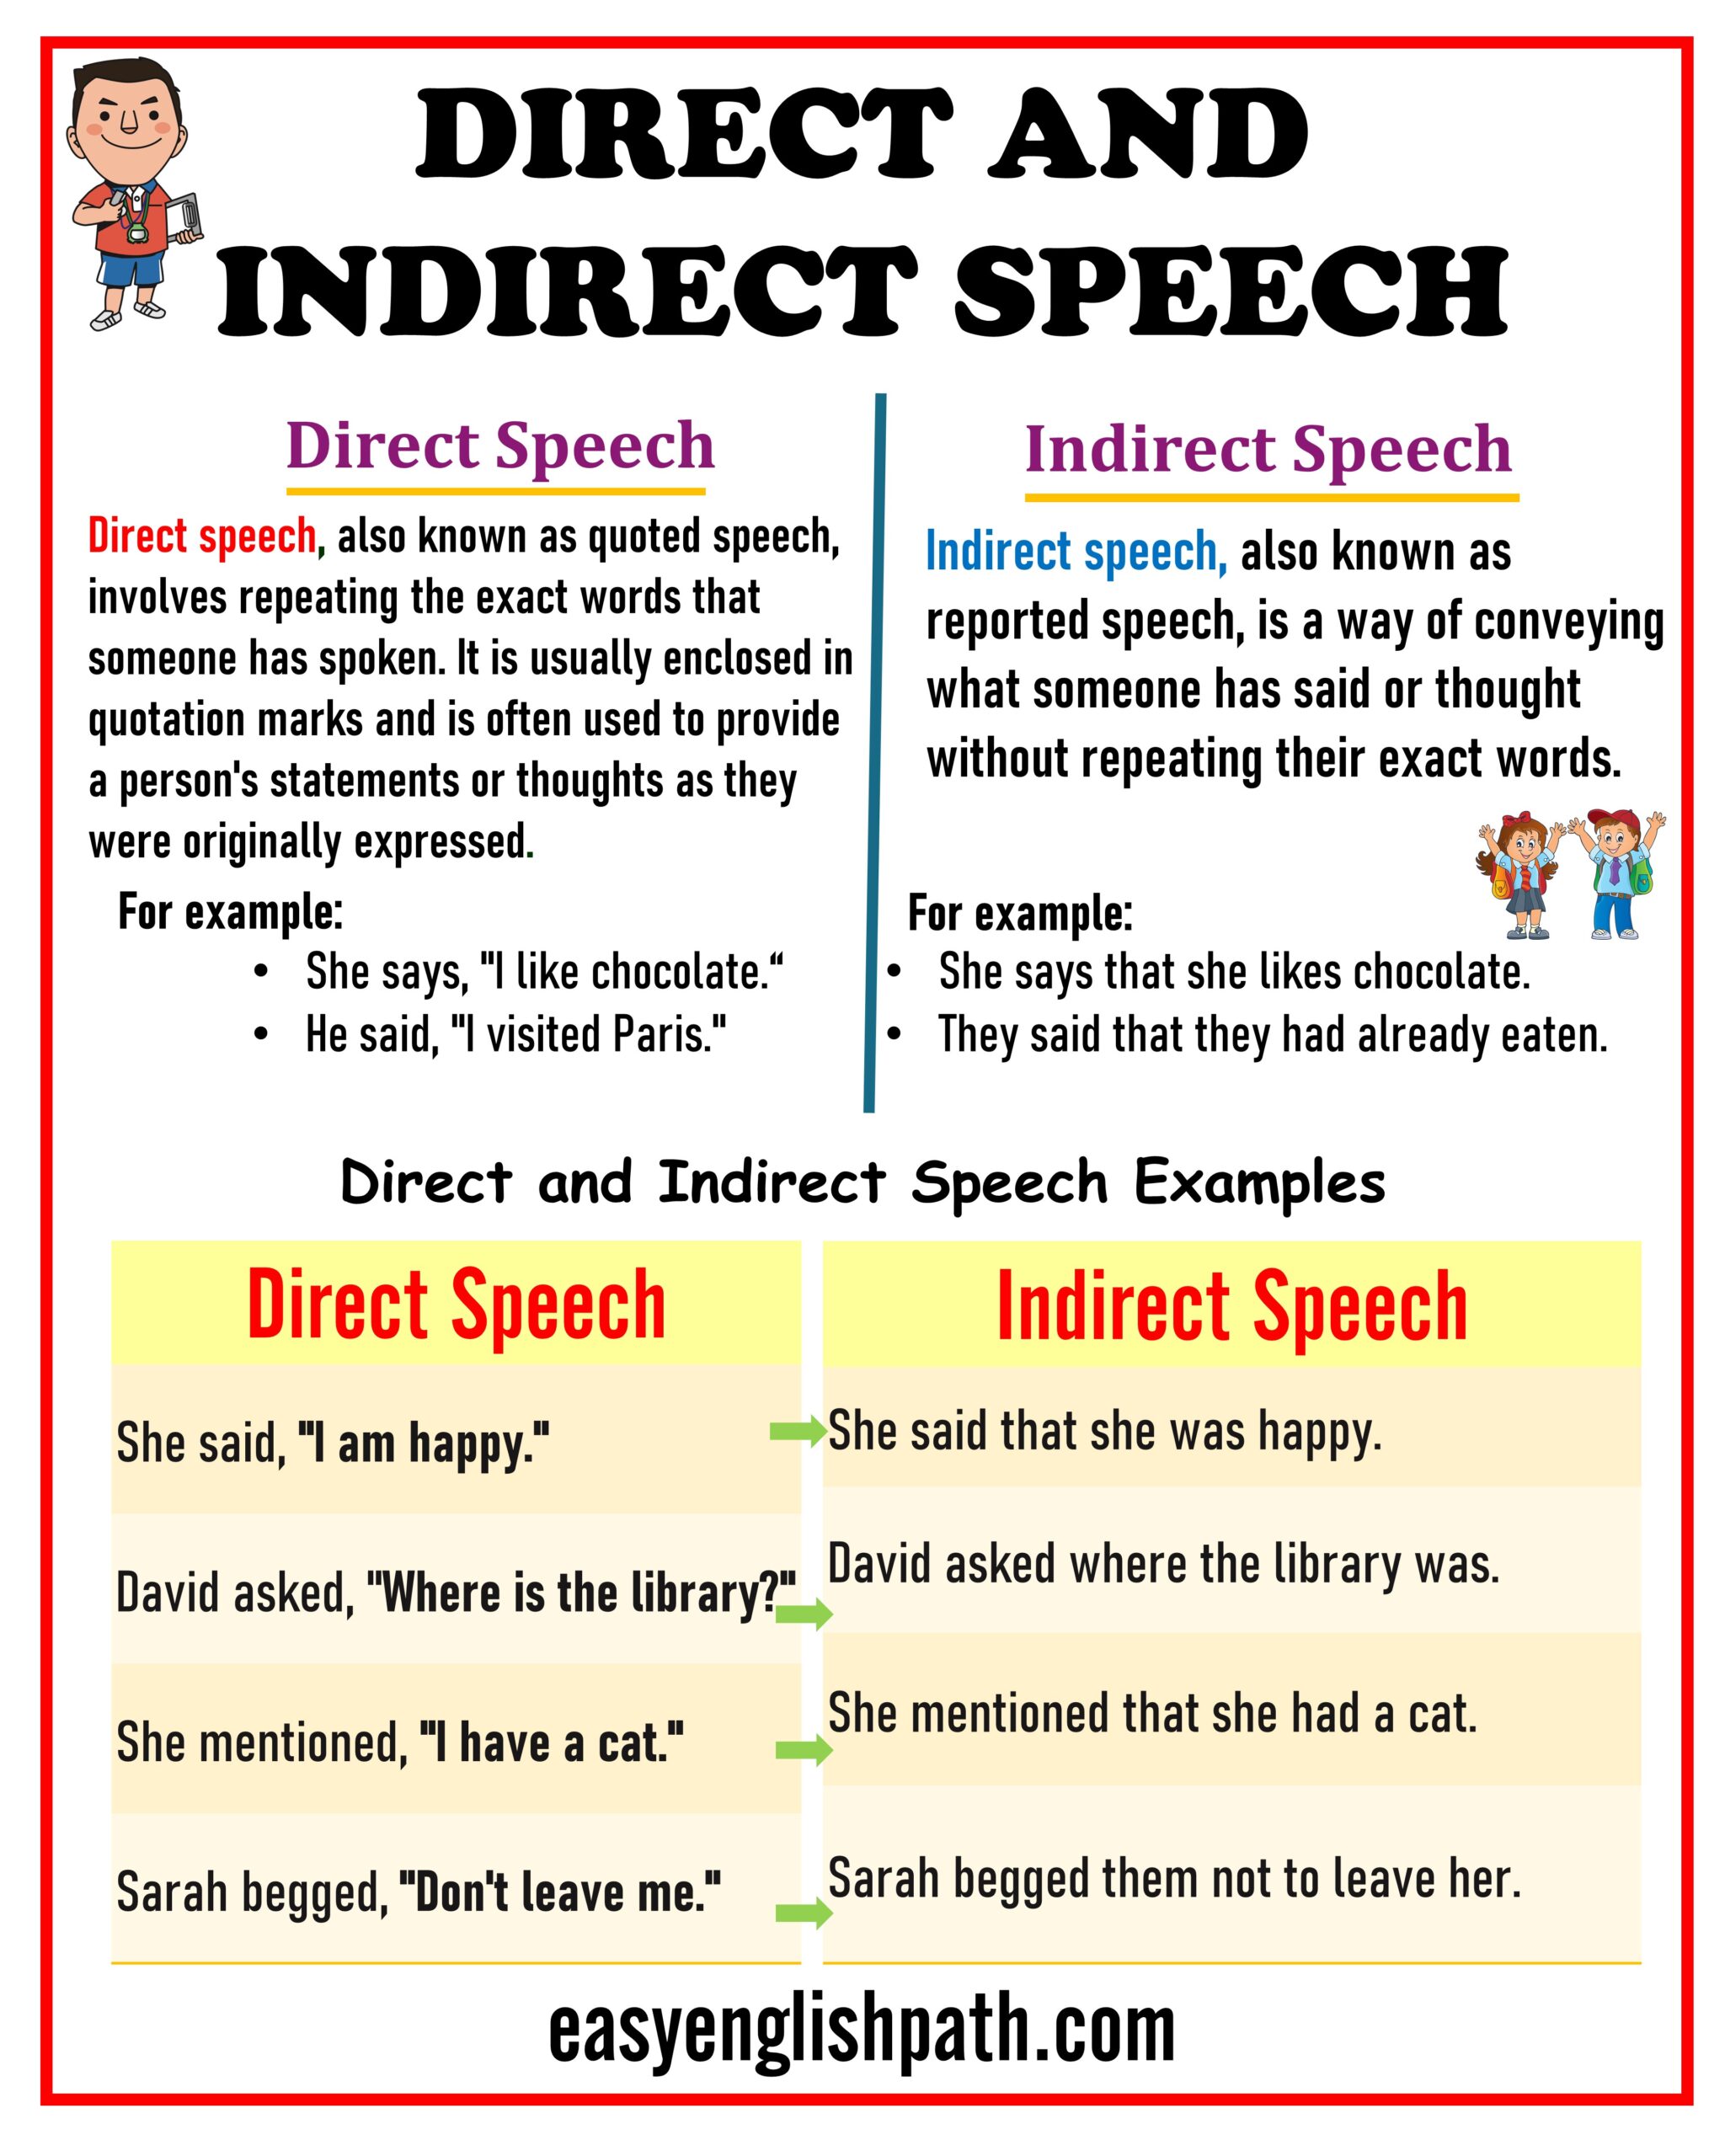 Master Direct and Indirect Speech: Rules and Examples in English